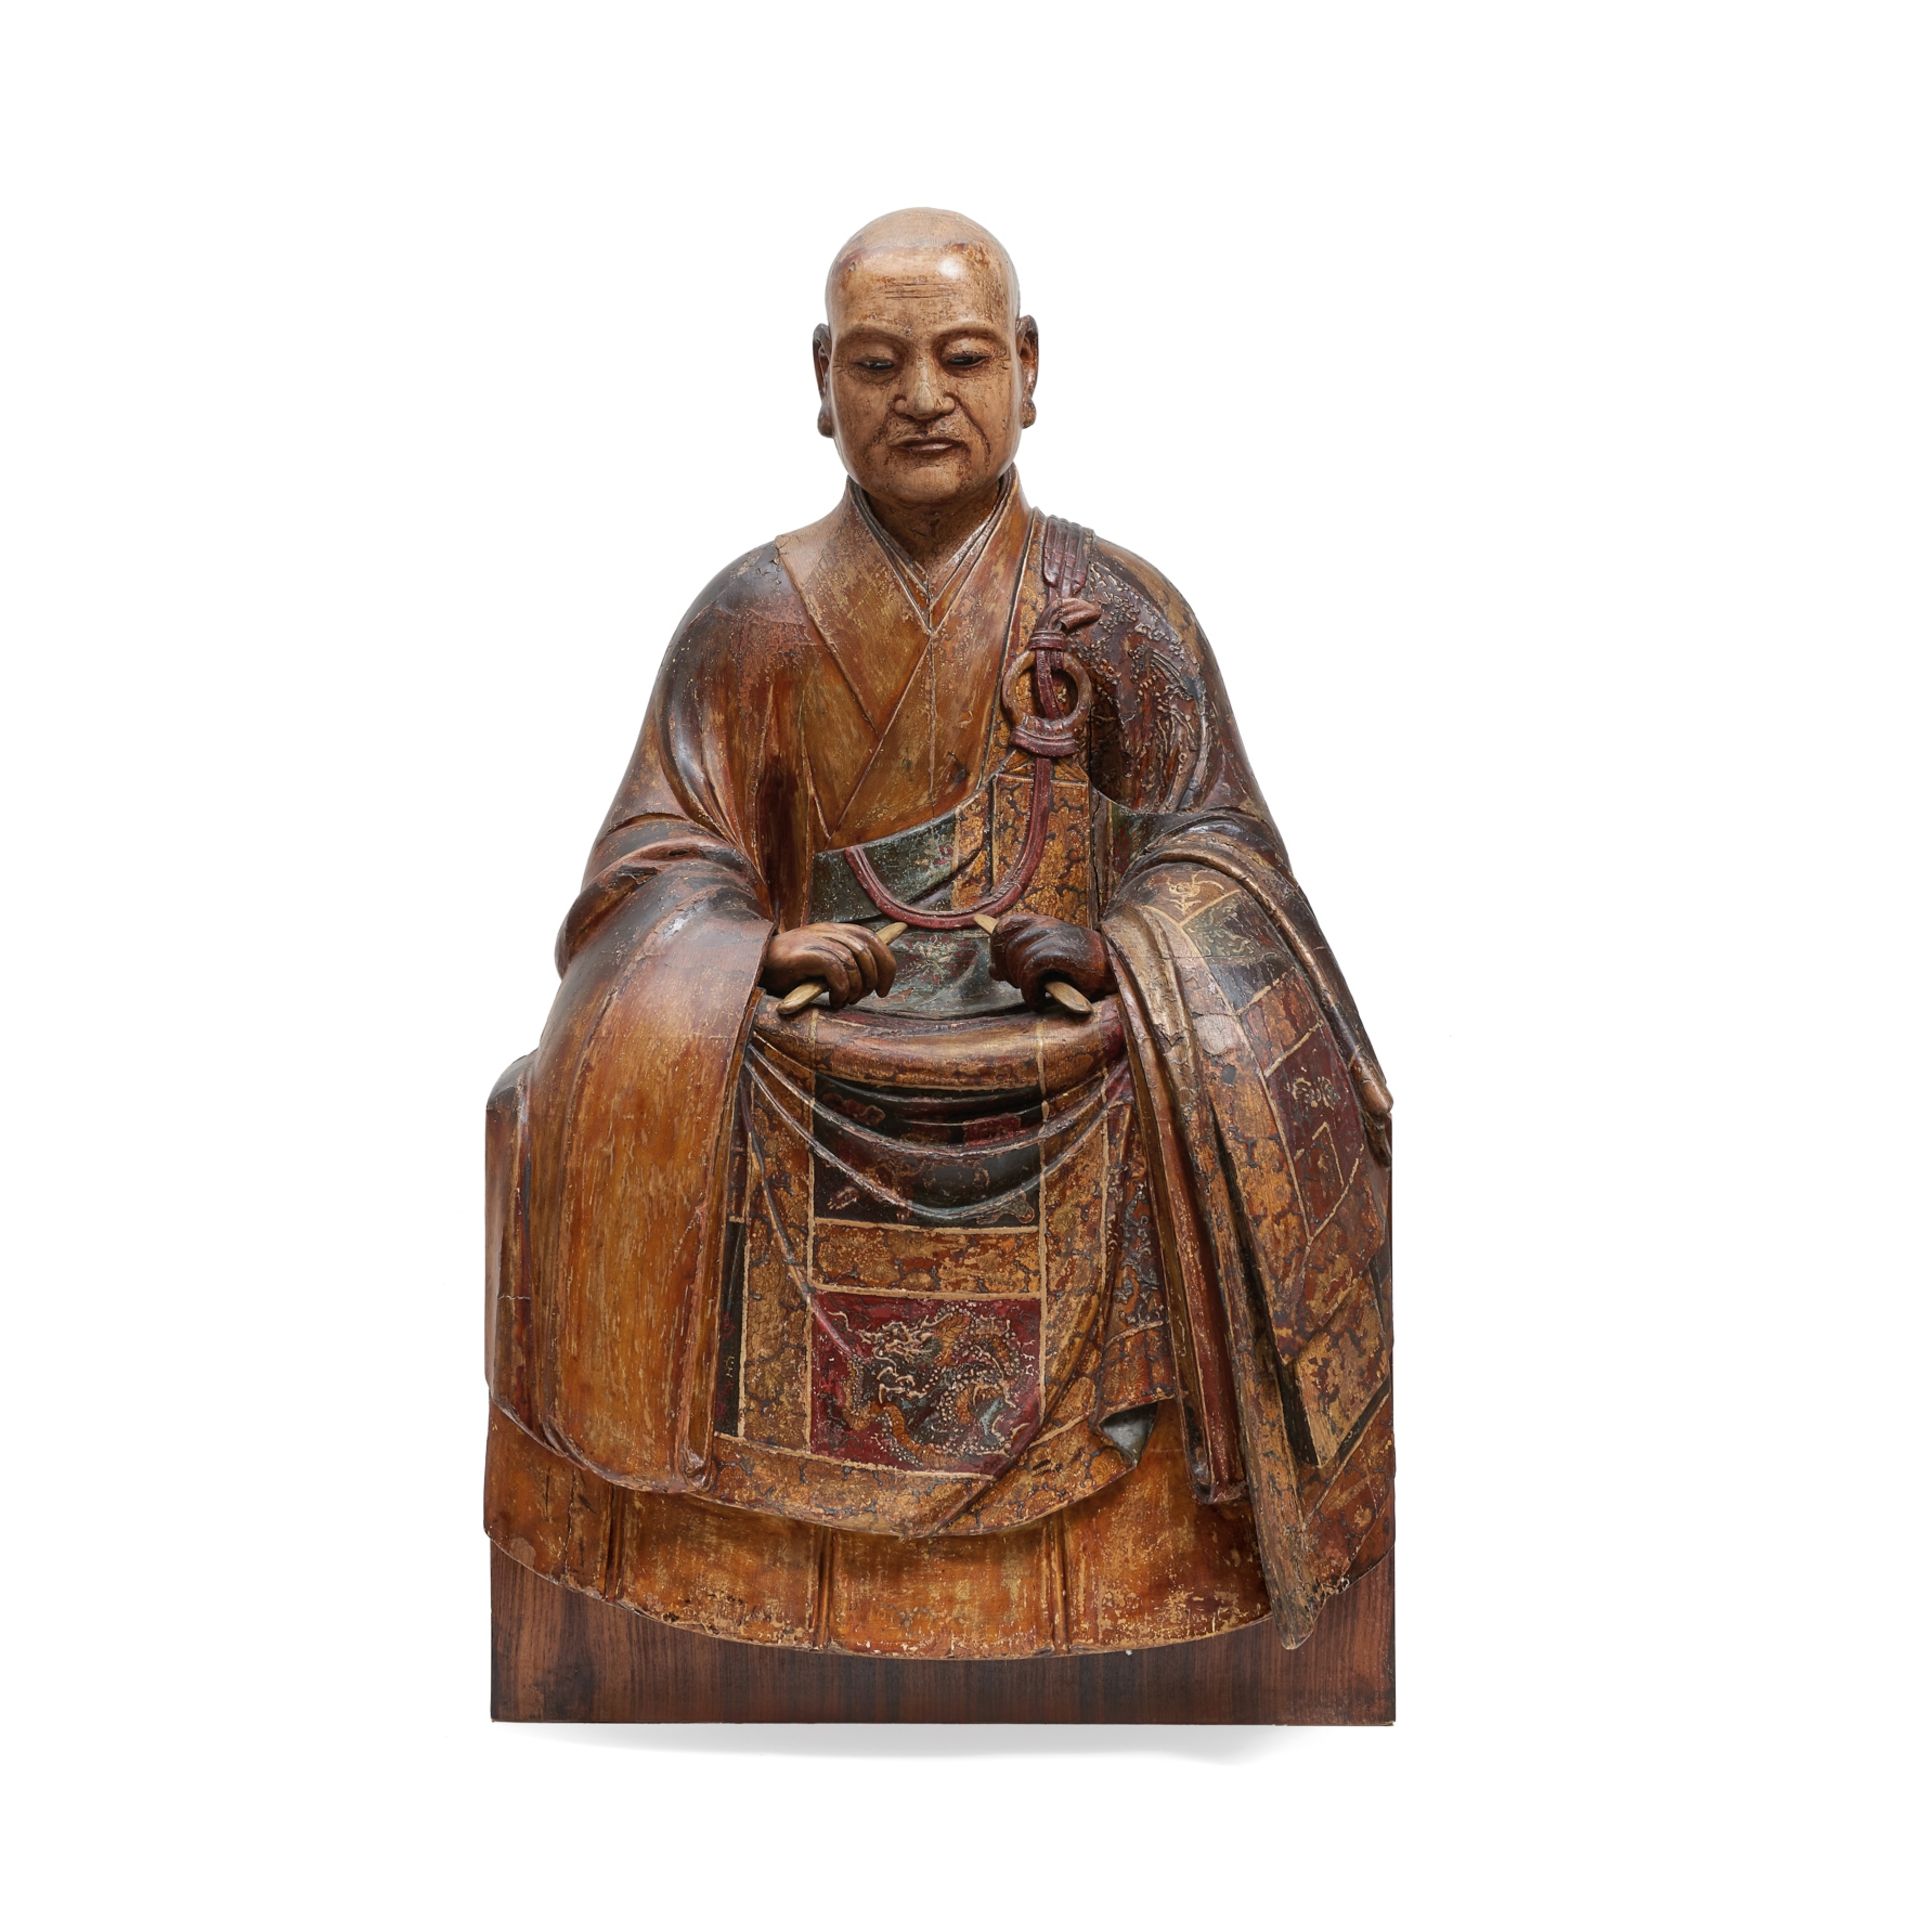 A LARGE GILT-LACQUERED POLYCHROME WOOD FIGURE OF A LUOHAN 18th century